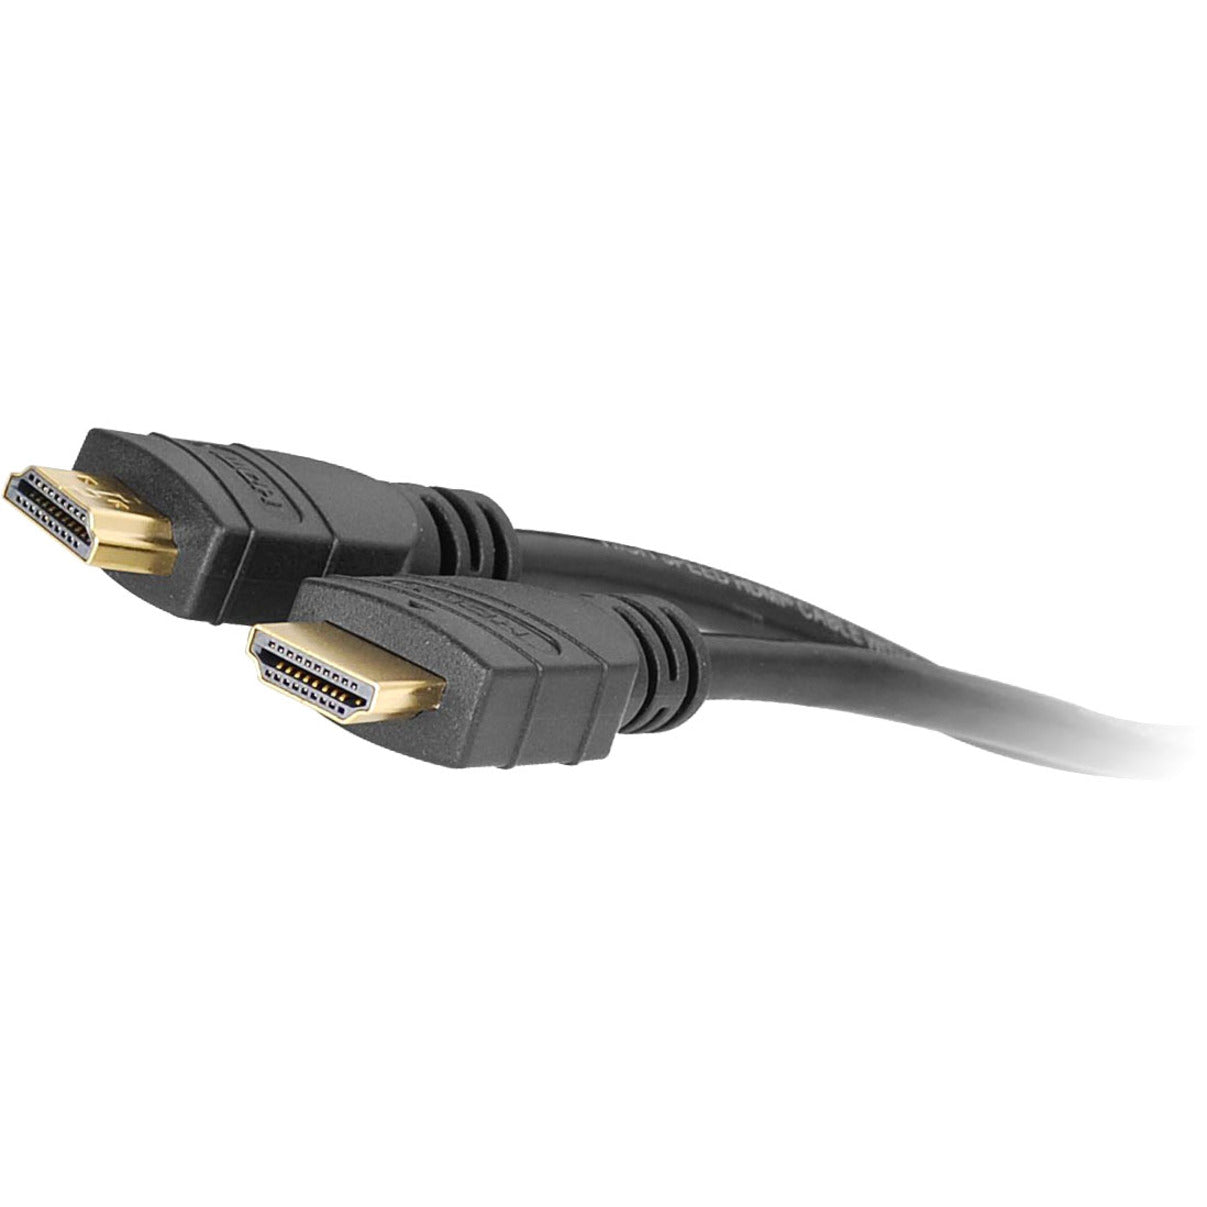 SIIG CB-H20612-S1 HDMI Cable, 16.40 ft, Molded, Copper Conductor, Gold Plated Connectors, Shielded, Black